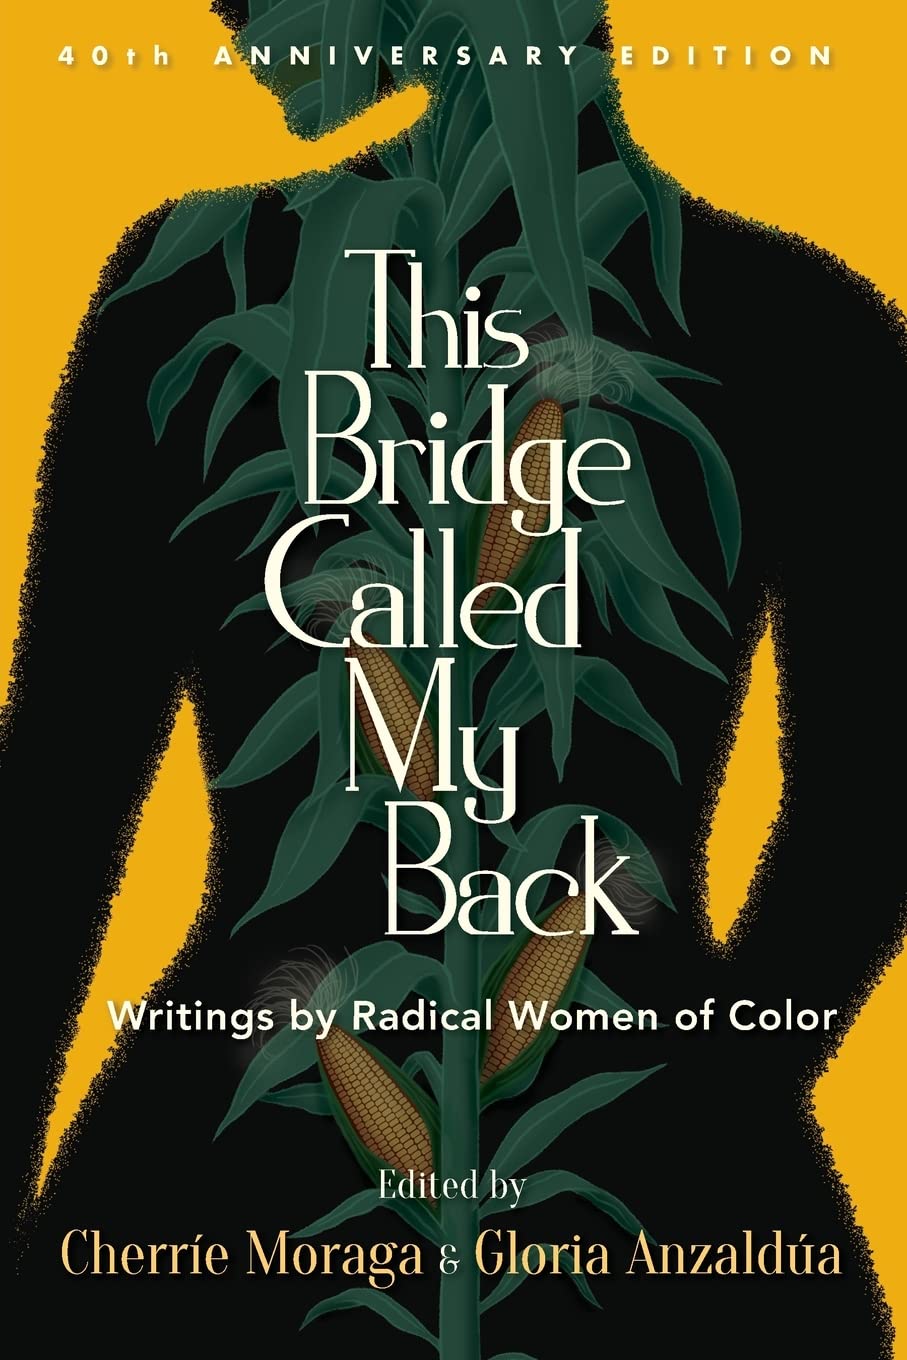 Image This bridge called my back : writings by radical women of color